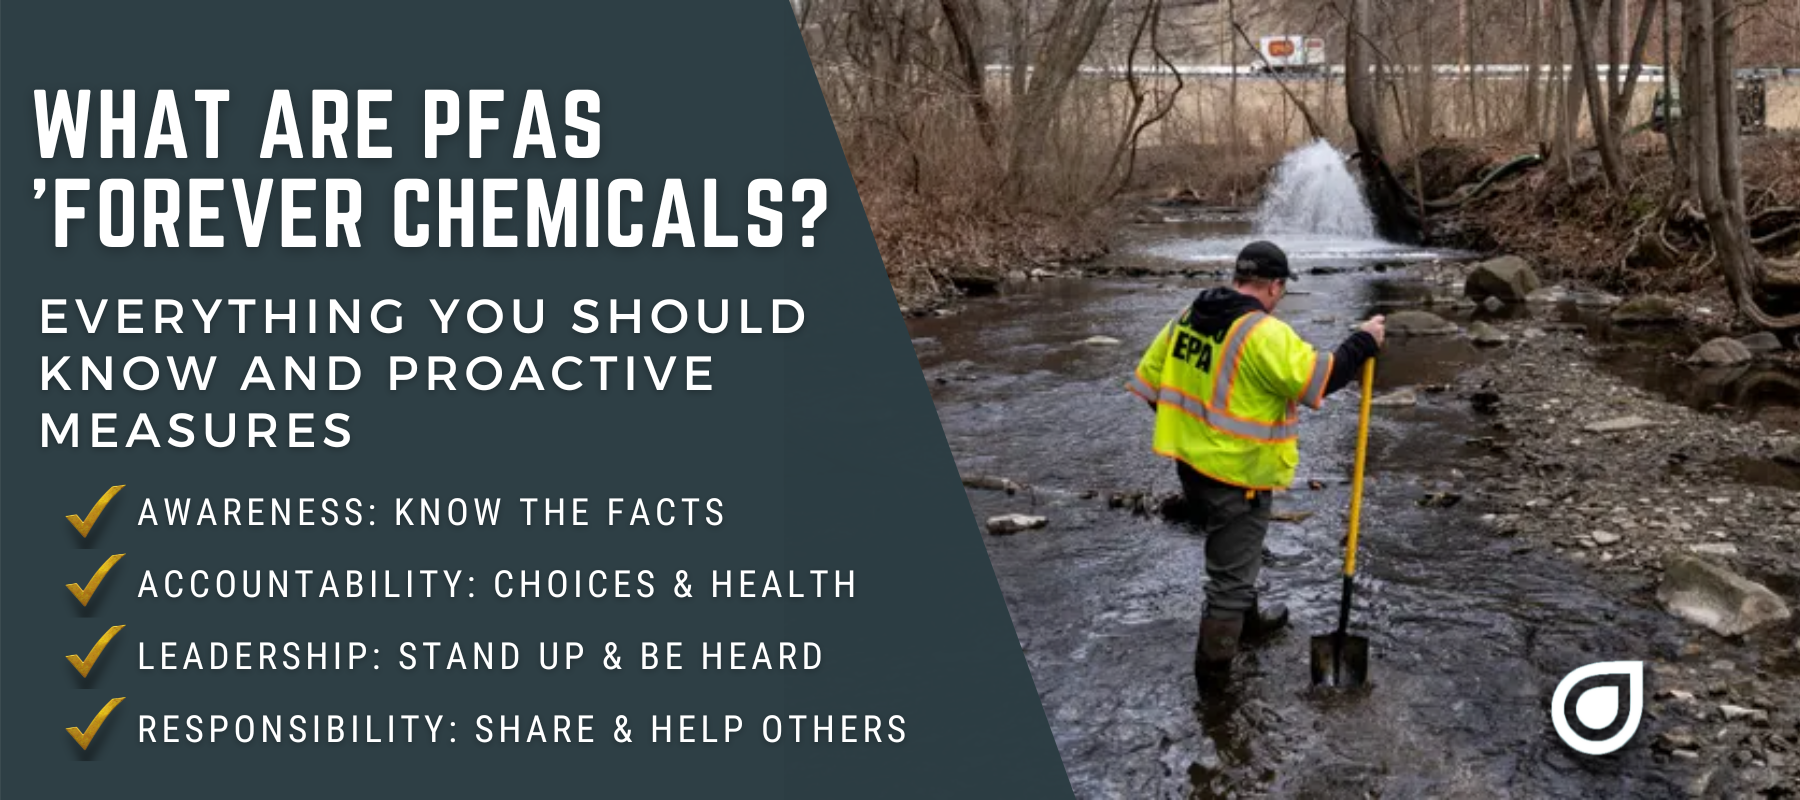 What Are PFAS Forever Chemicals Where Do they Come From and What Can We do Proactively?